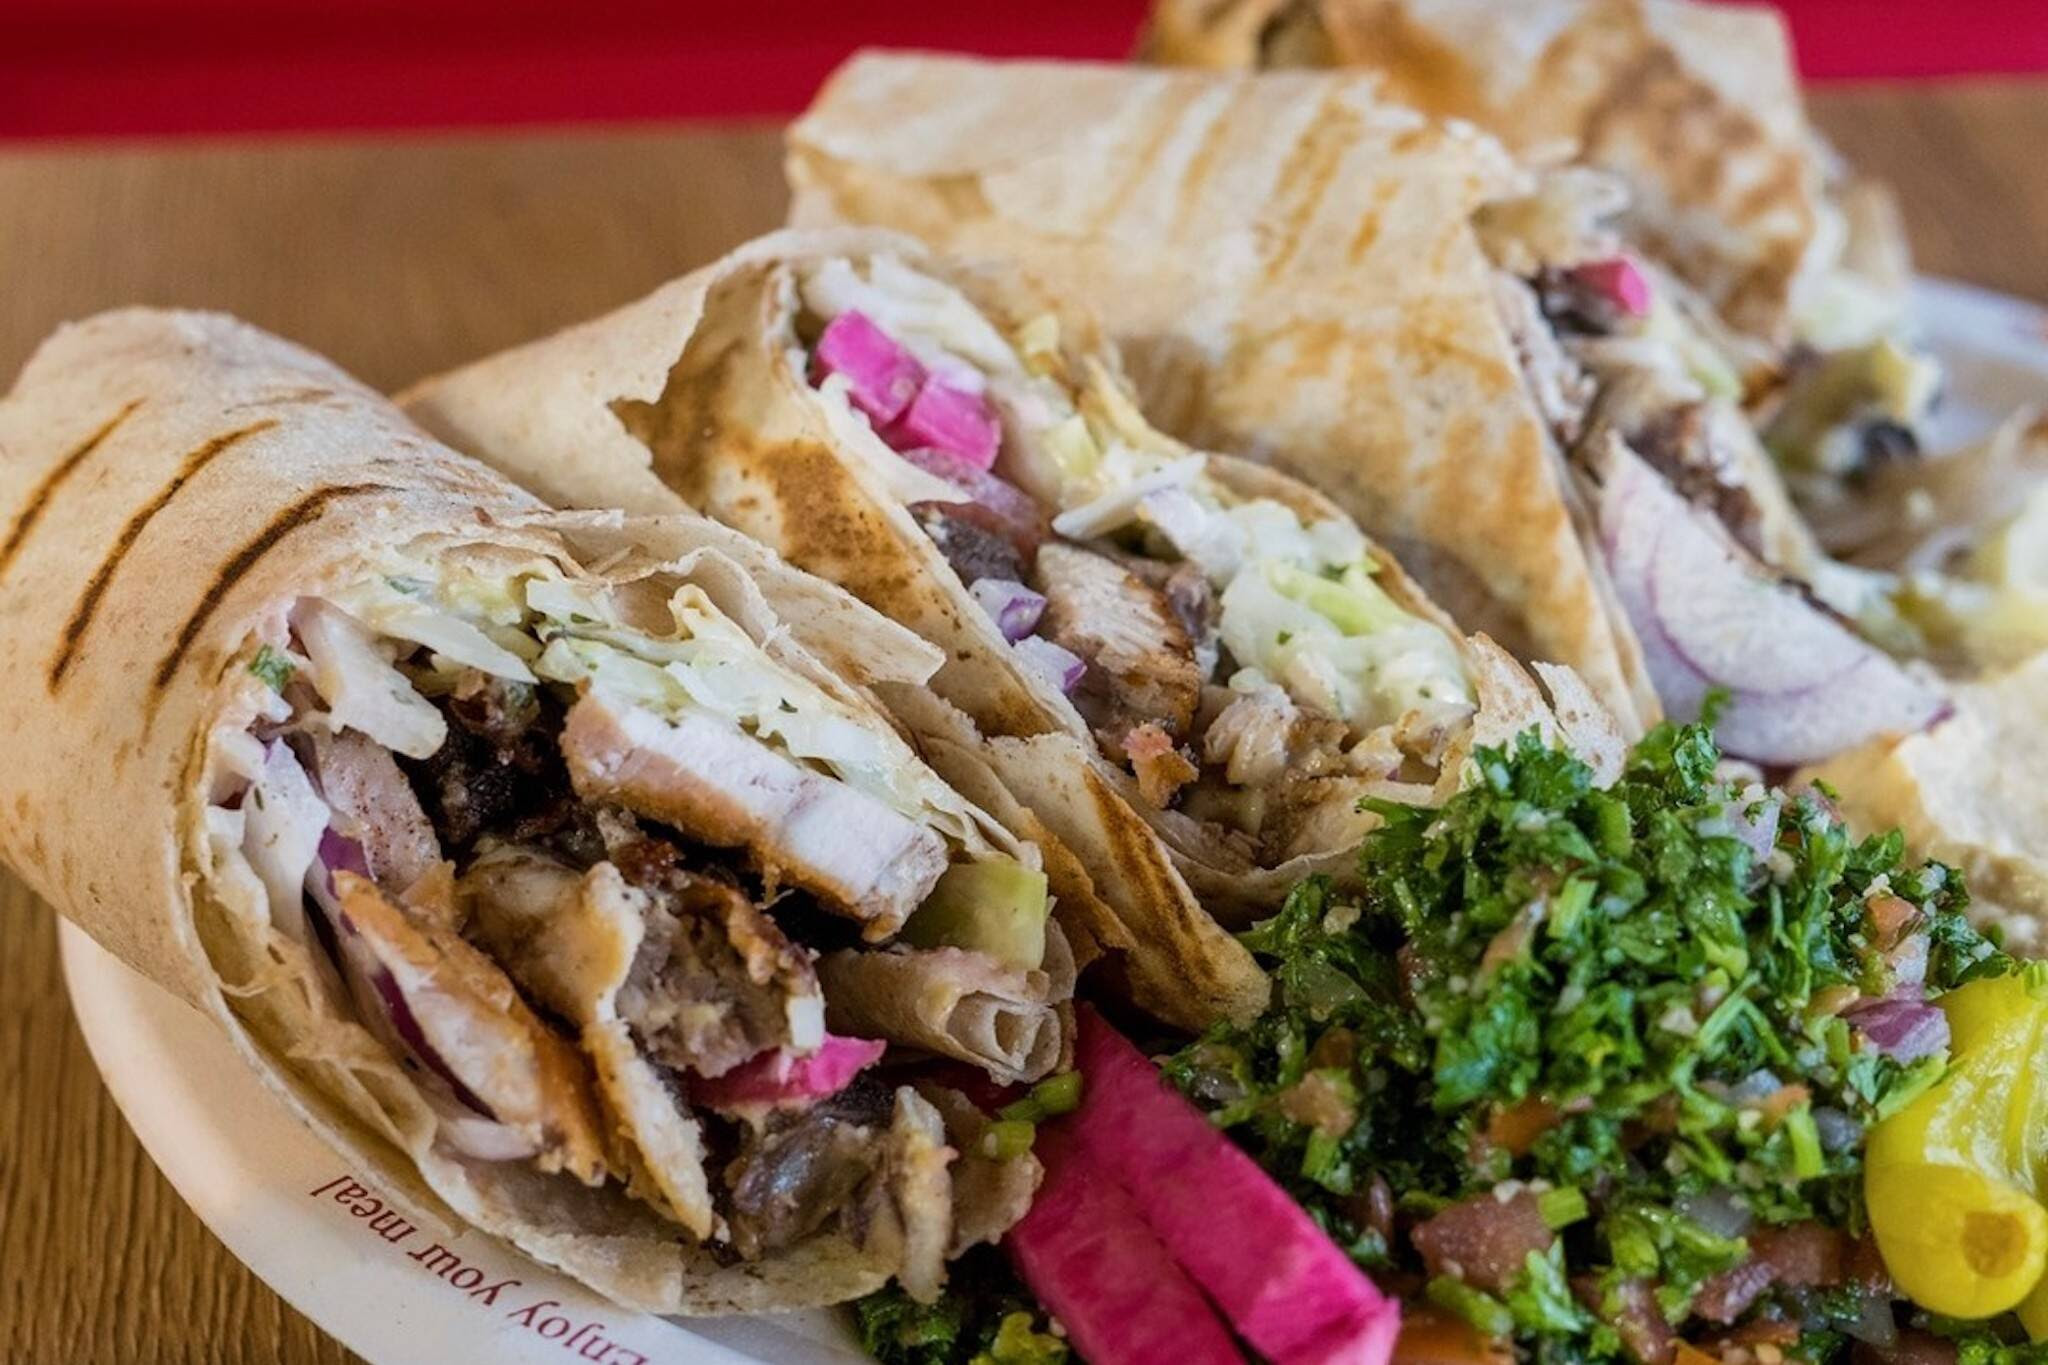 Famous shawarma restaurant from Montreal opens first Toronto location